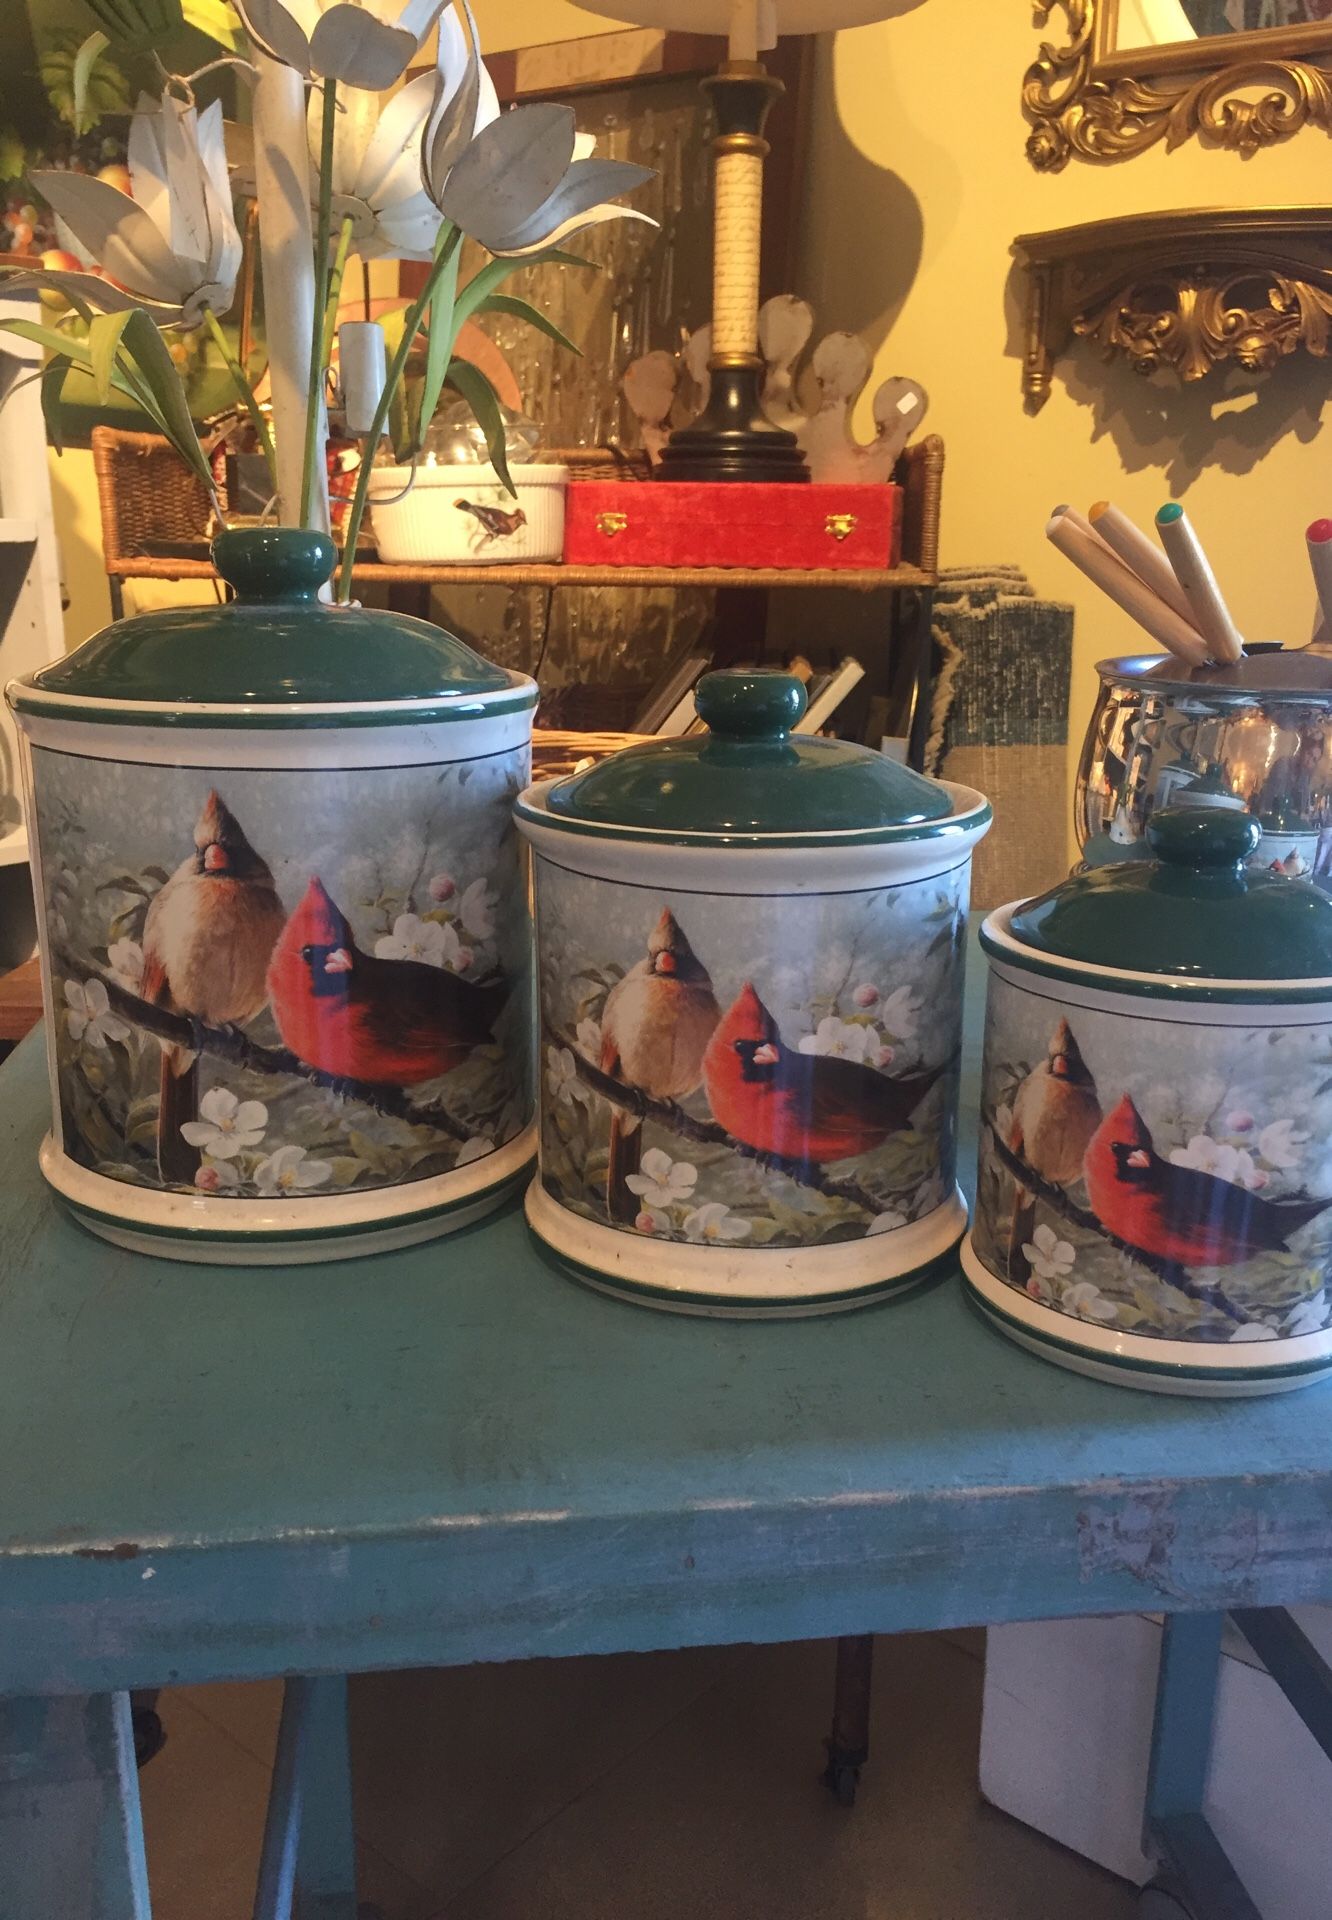 3 canisters kitchen Containers, flower sugar coffee perhaps, ceramic, Cardinals, let’s get organized